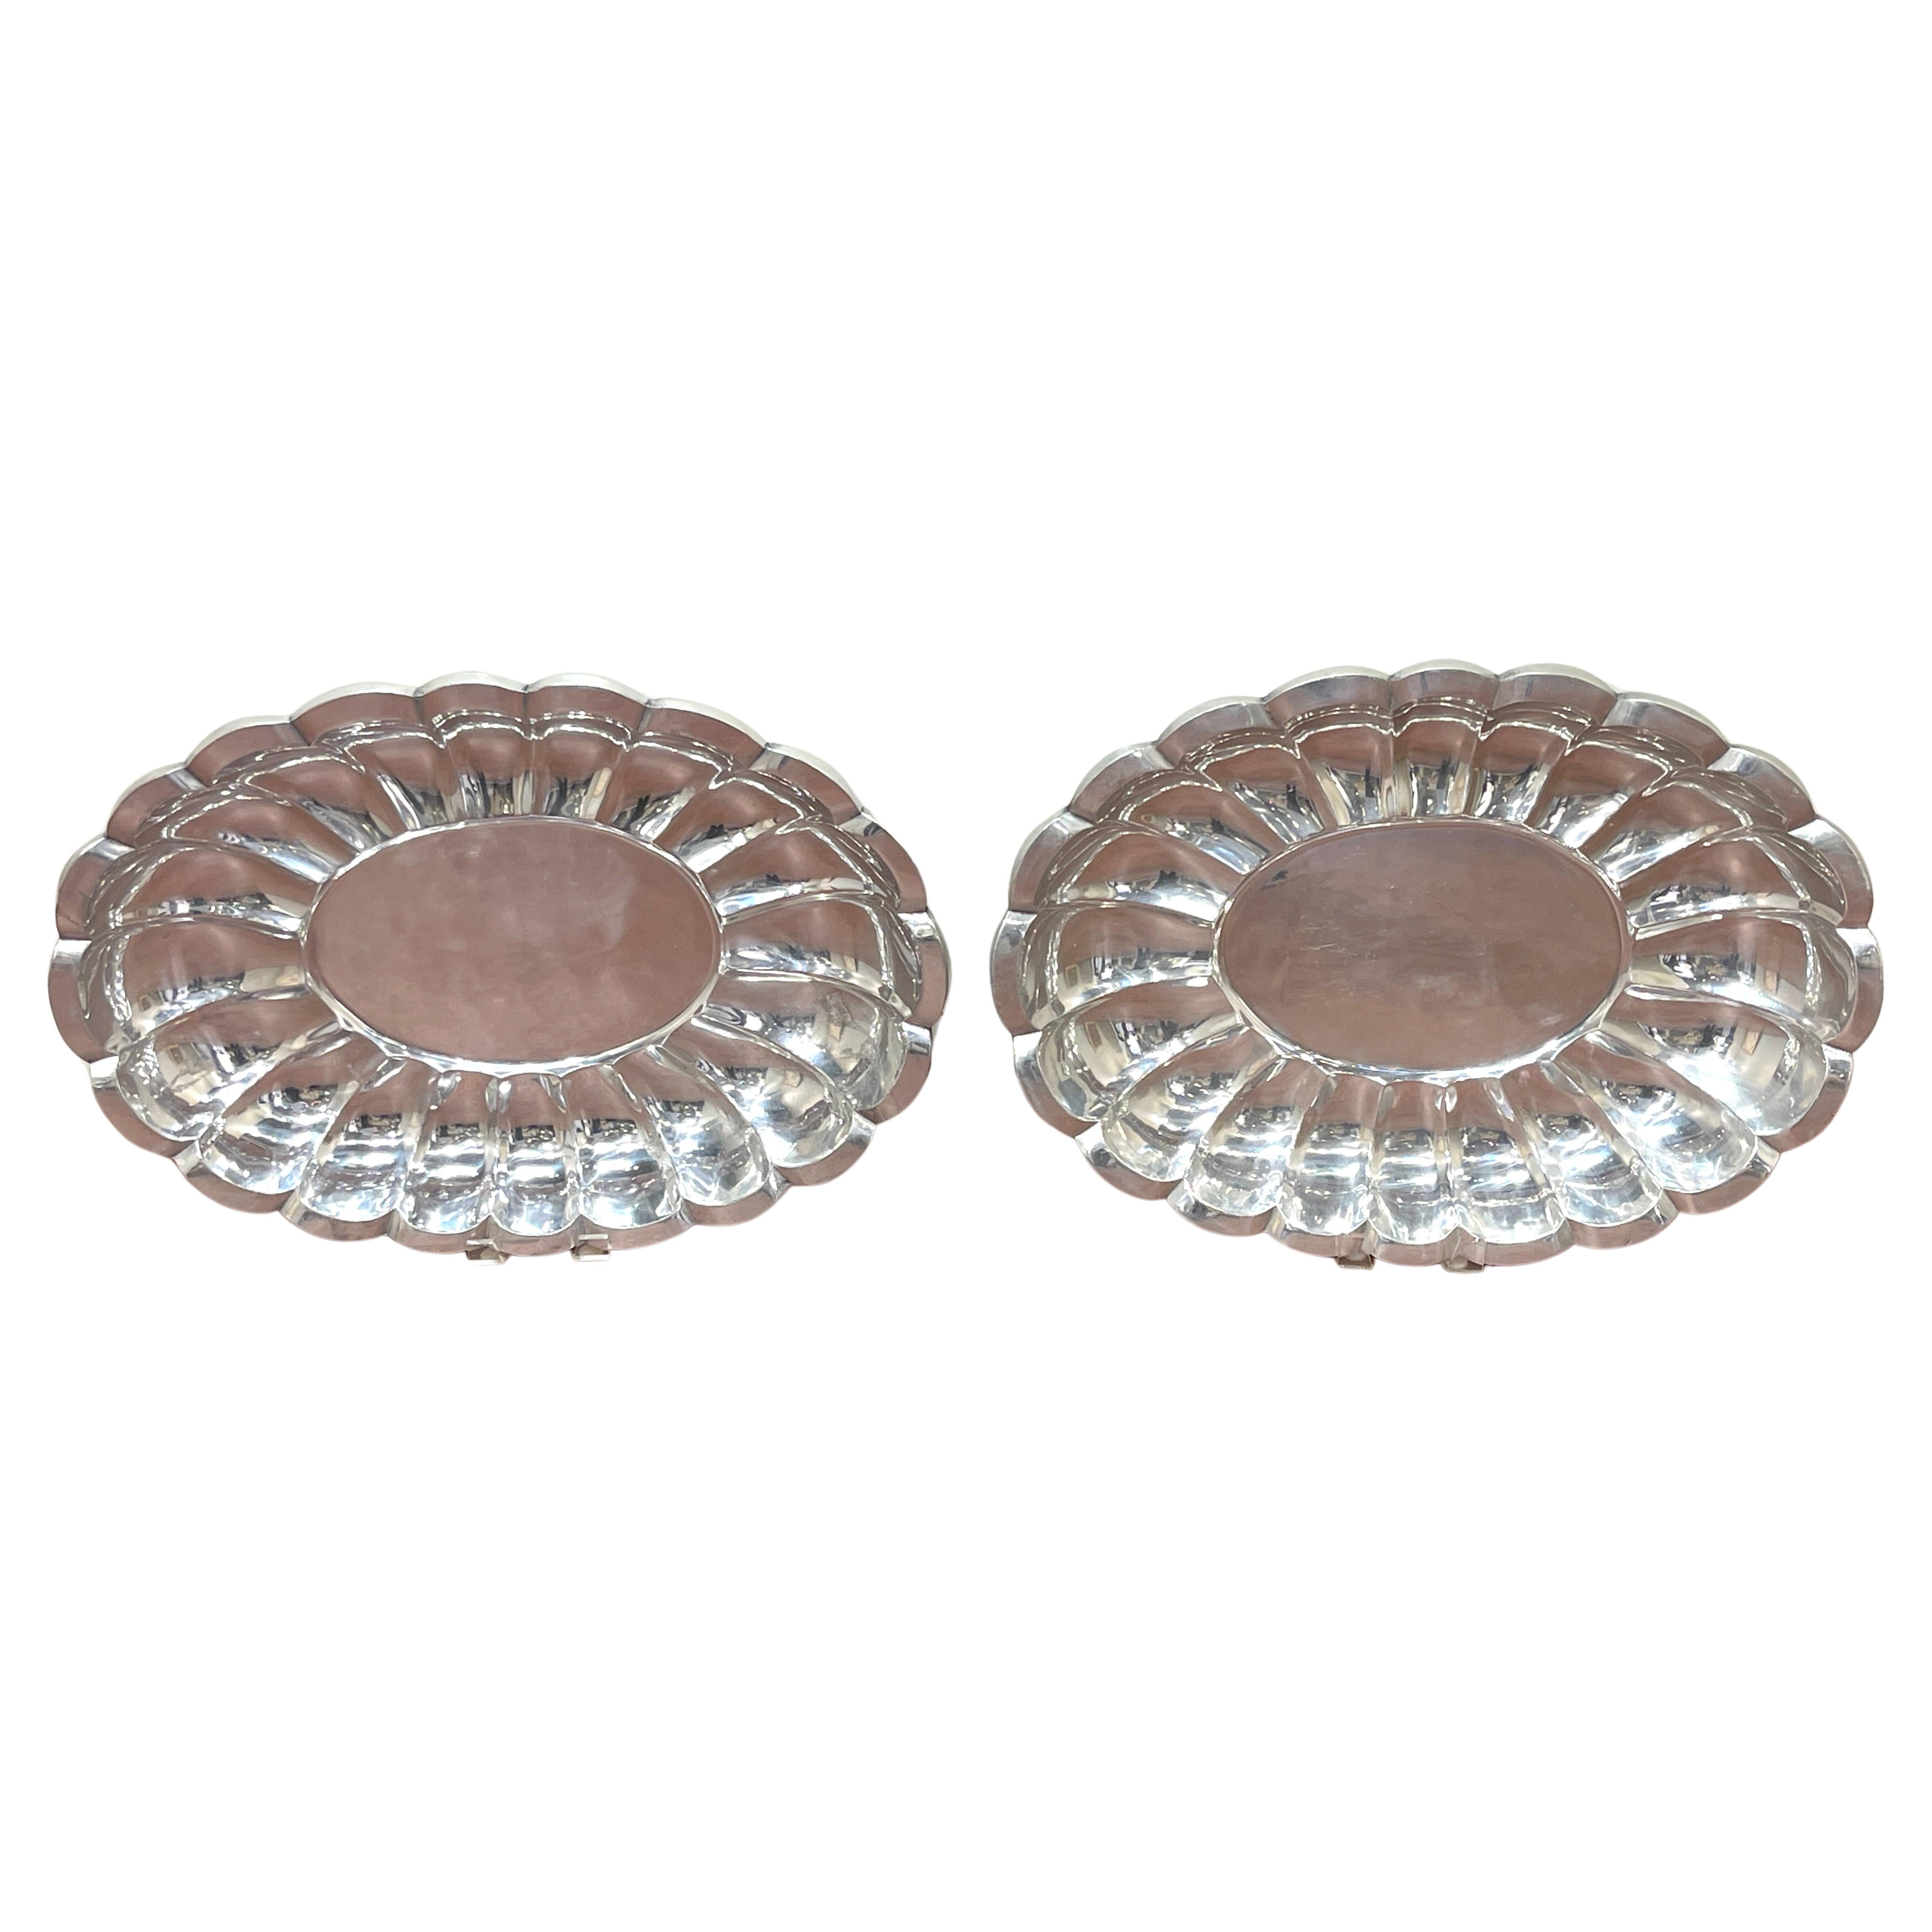 Pair Monumental Arthur Court Neoclassical / Southwest Style Oval Salvers/Trays For Sale